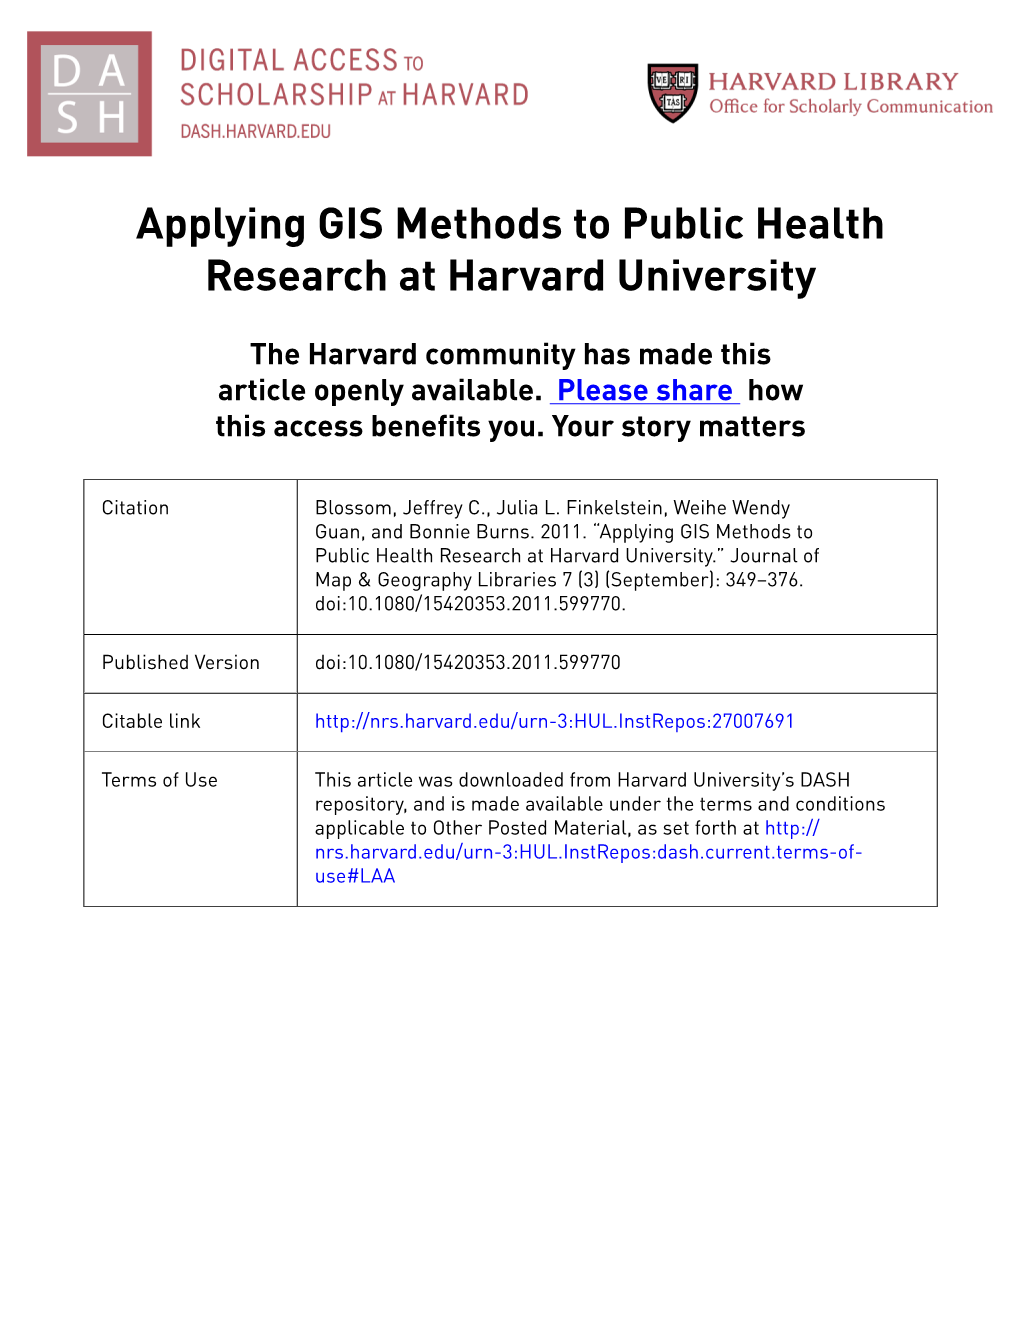 Applying GIS Methods to Public Health Research at Harvard University